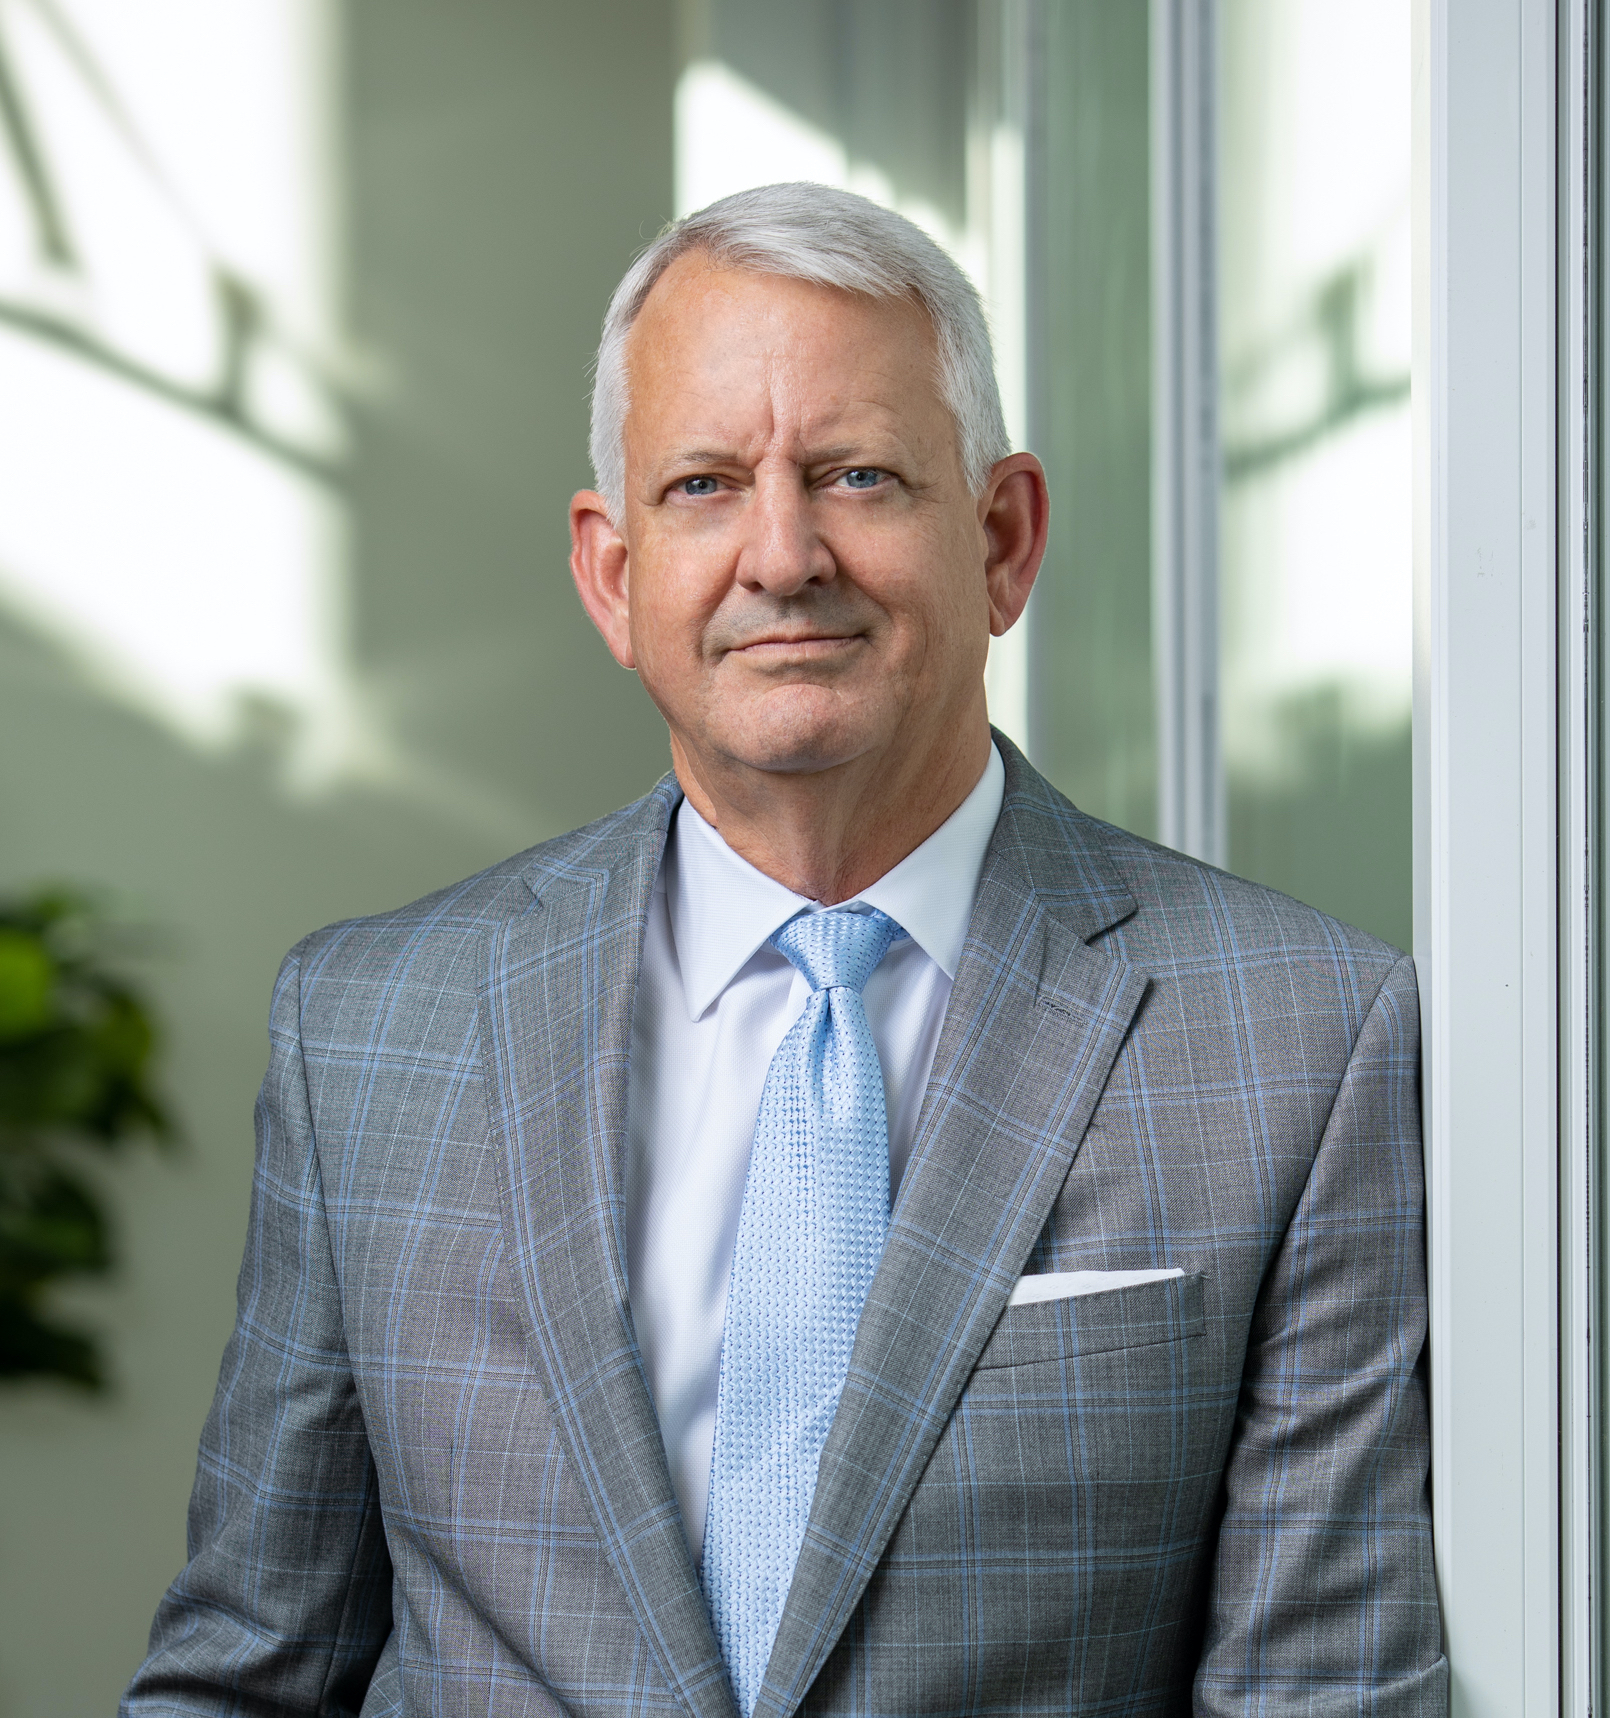 Courtesy. Budge Huskey, president and CEO of Naples-based Premier Sotheby’s International Realty says Premier agents in Naples and Sarasota are seeing the most interest from Texas, California, Oregon, Arizona and Hawaii.